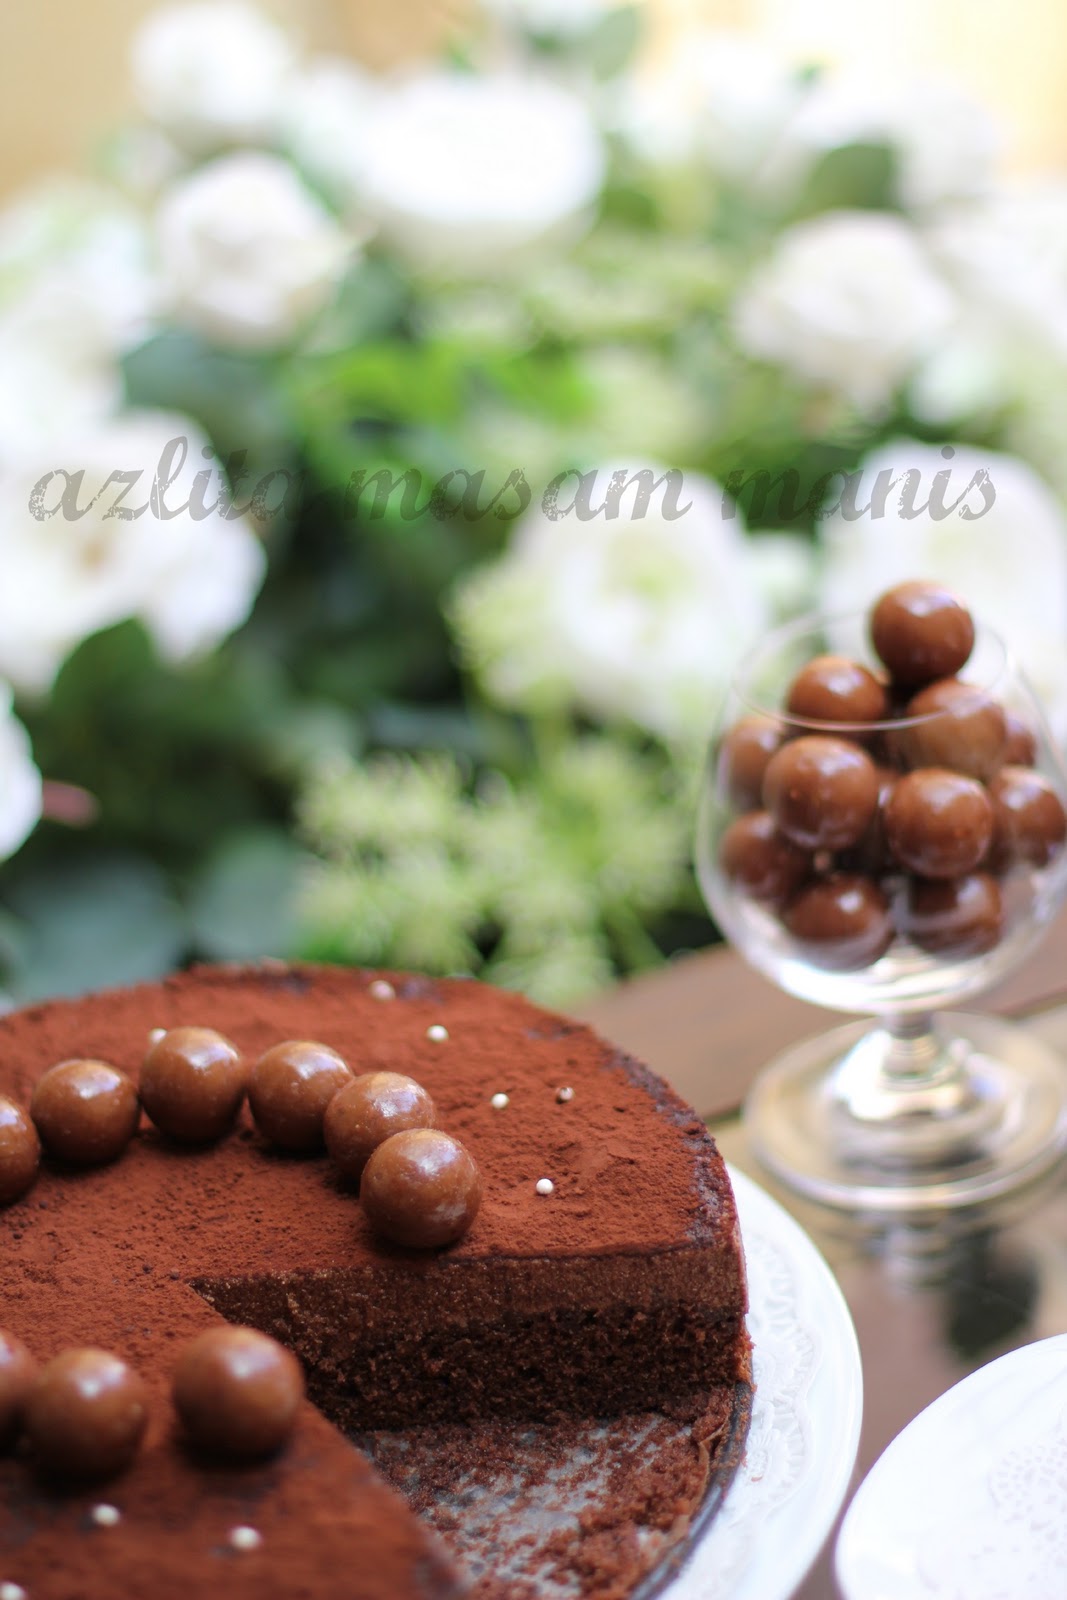 Masam manis: CHOCO MOUSSE BROWNIES